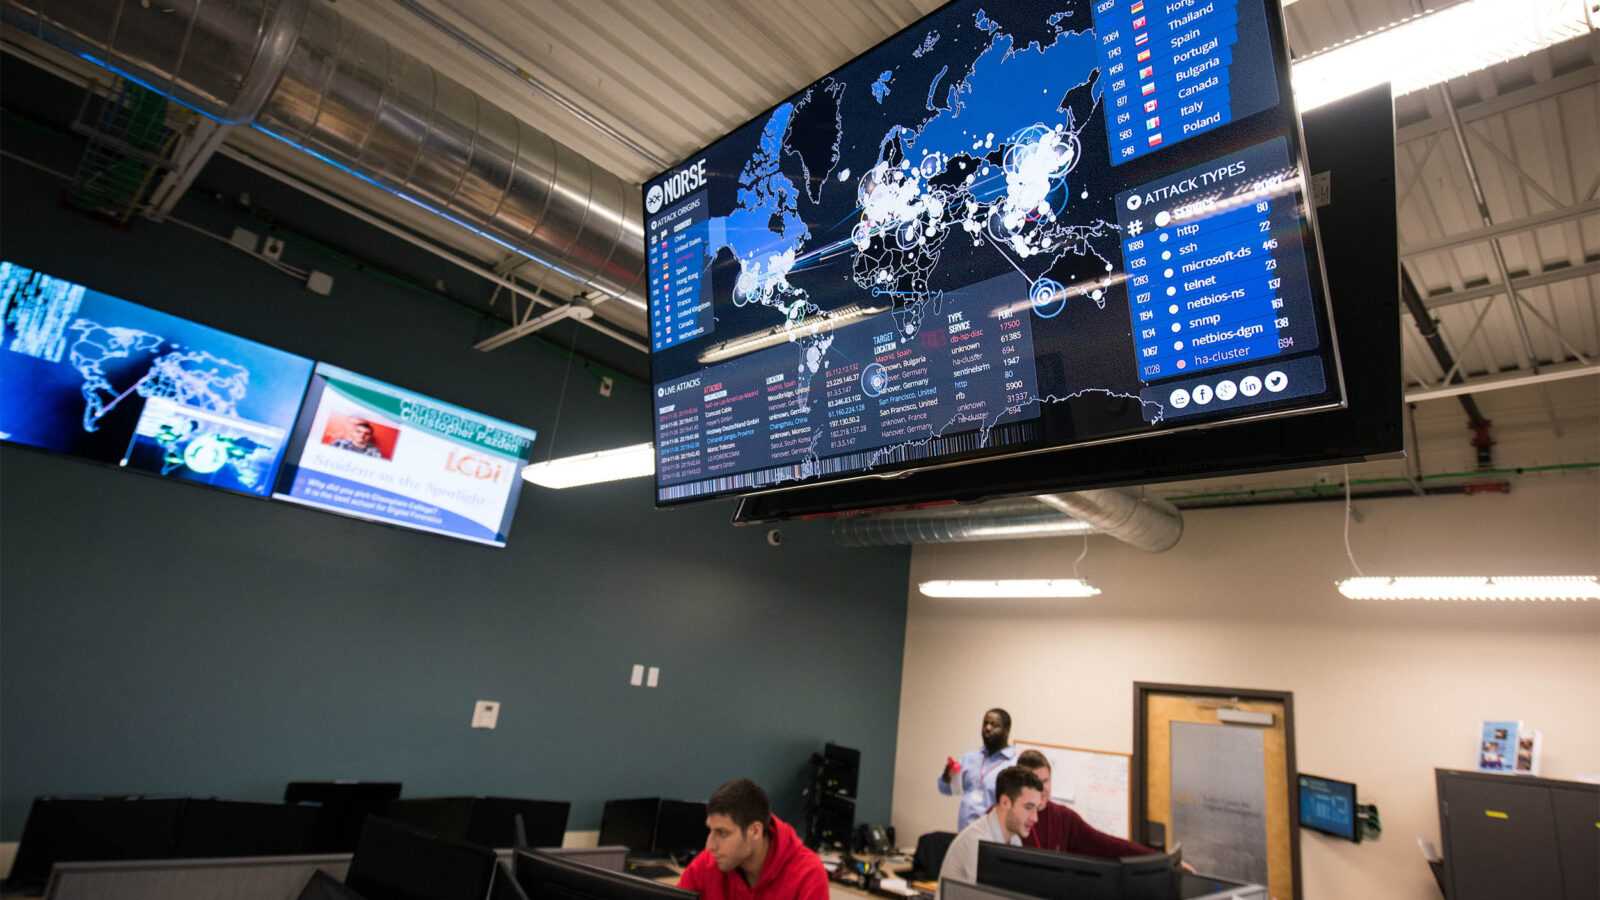 a large monitor in a professional environment featuring lots of visual data